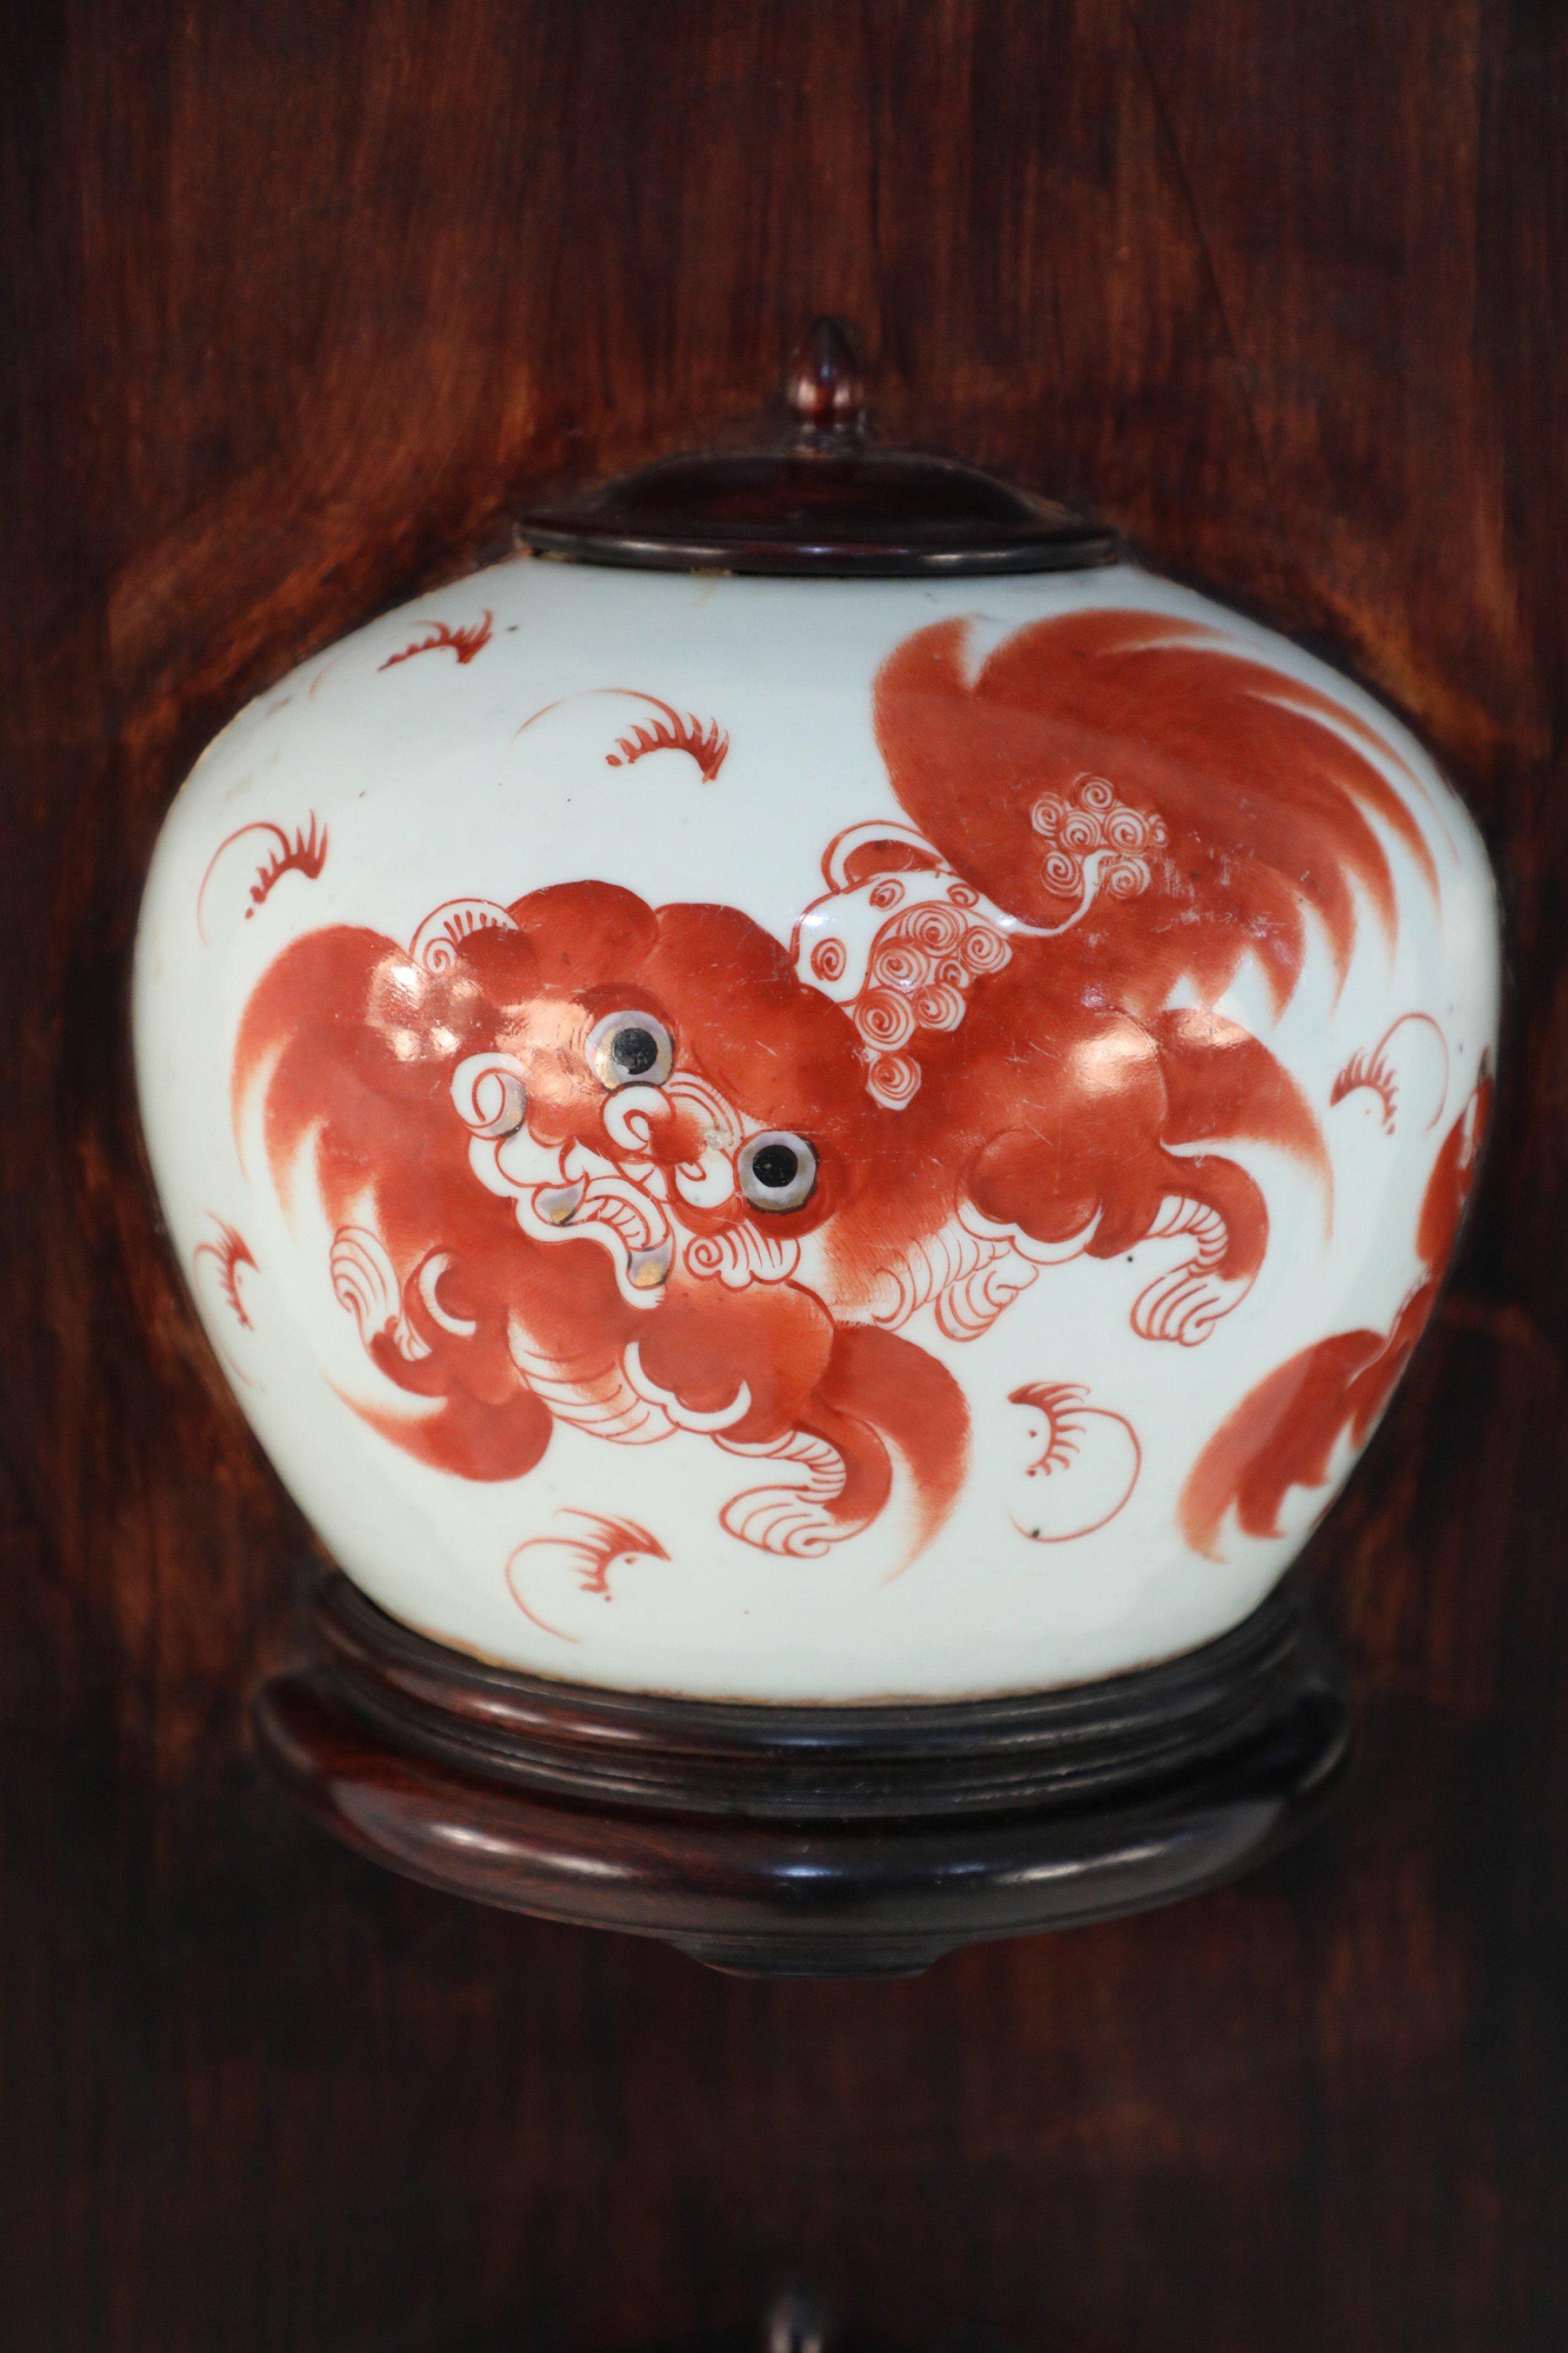 Antique Chinese (Late 19th Century) wall plaque framing a bisected porcelain lidded jar painted with orange foo dogs and characters in wood with a decorative faux bamboo edge.